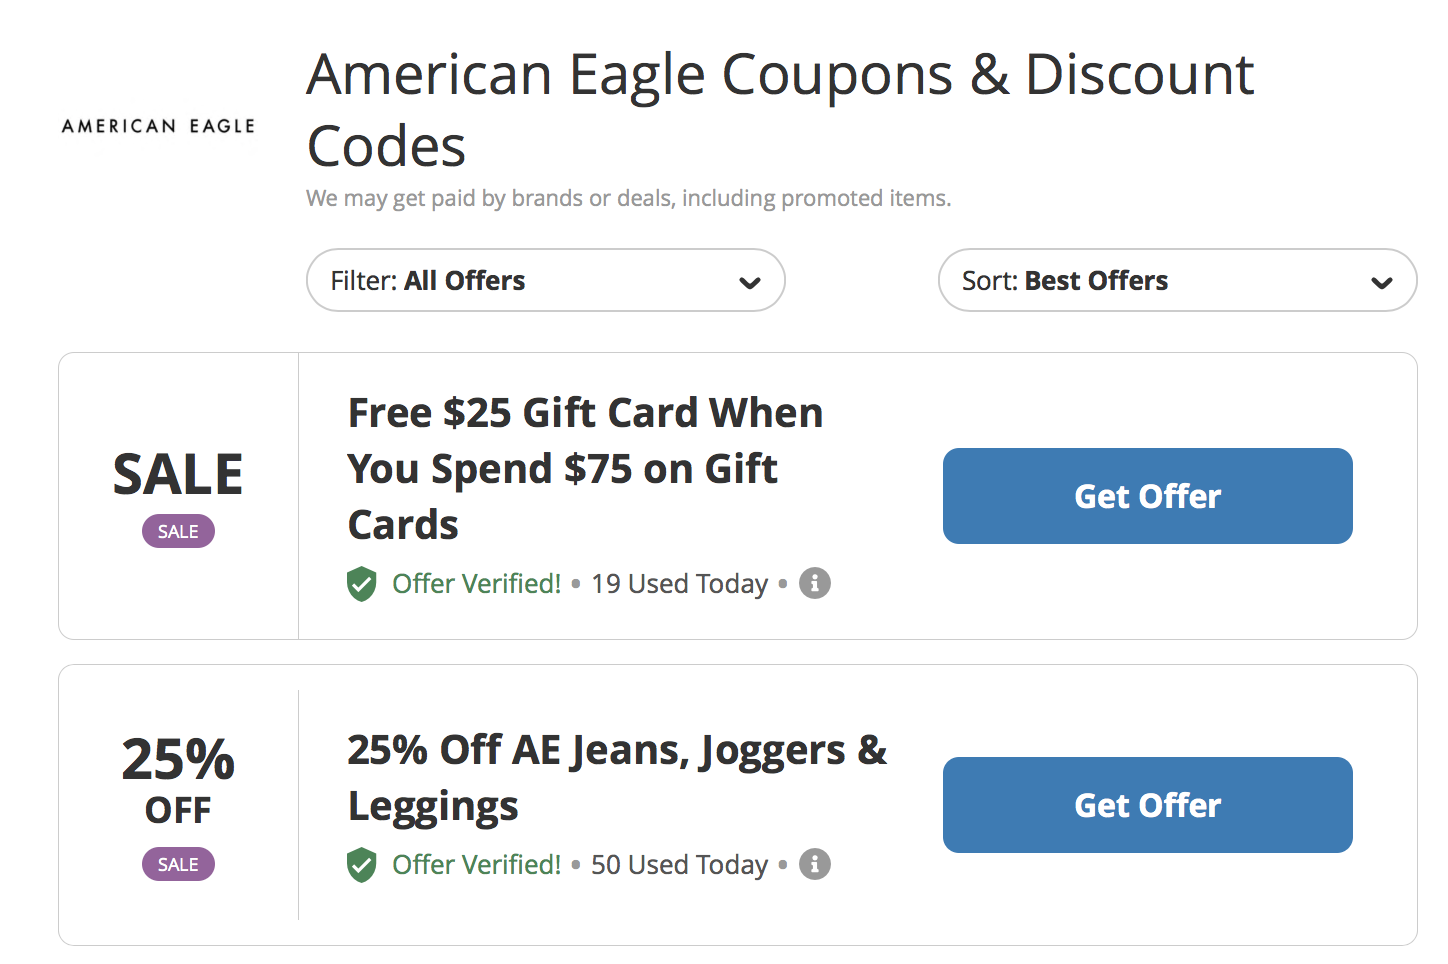 American Eagle Outfitters Canada Clearance: Buy One, Get One FREE on Women's,  Men's & Aerie Collection! - Canadian Freebies, Coupons, Deals, Bargains,  Flyers, Contests Canada Canadian Freebies, Coupons, Deals, Bargains,  Flyers, Contests